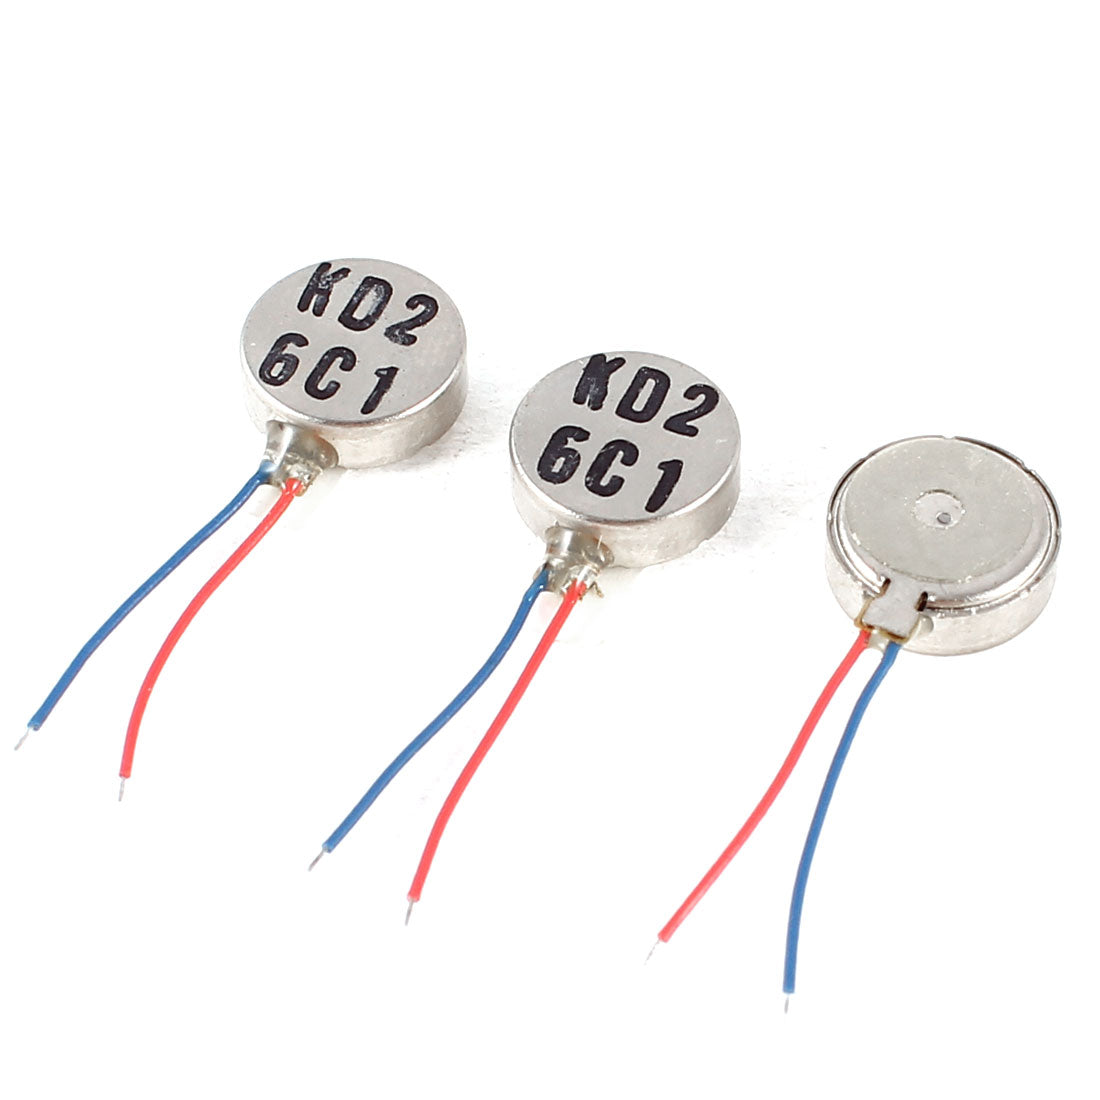 uxcell Uxcell 3V DC 2 Leads 10mm x 3.5mm Coin Mobile Phone Vibration Motor 3 Pcs